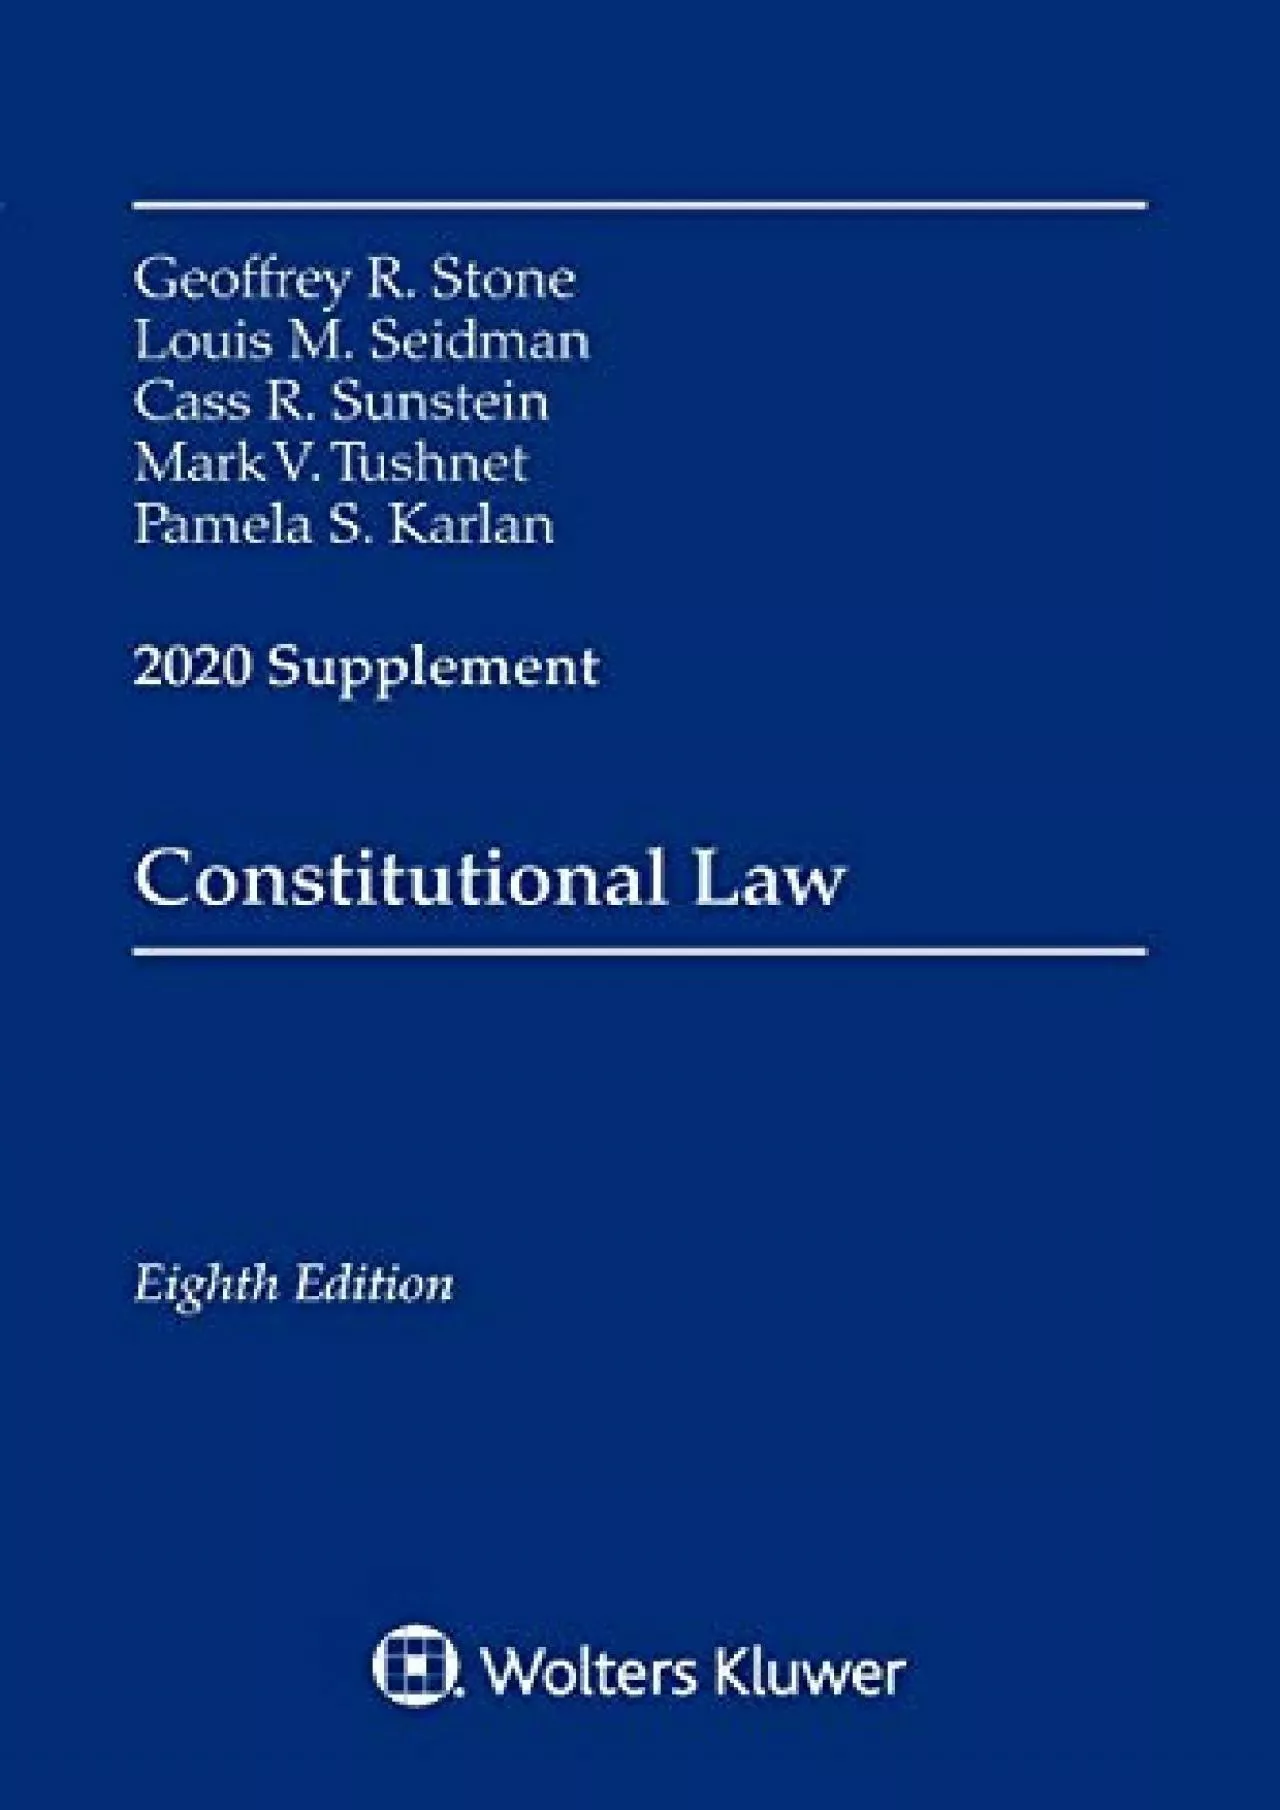 $PDF$/READ/DOWNLOAD Constitutional Law: 2020 Supplement (Supplements)